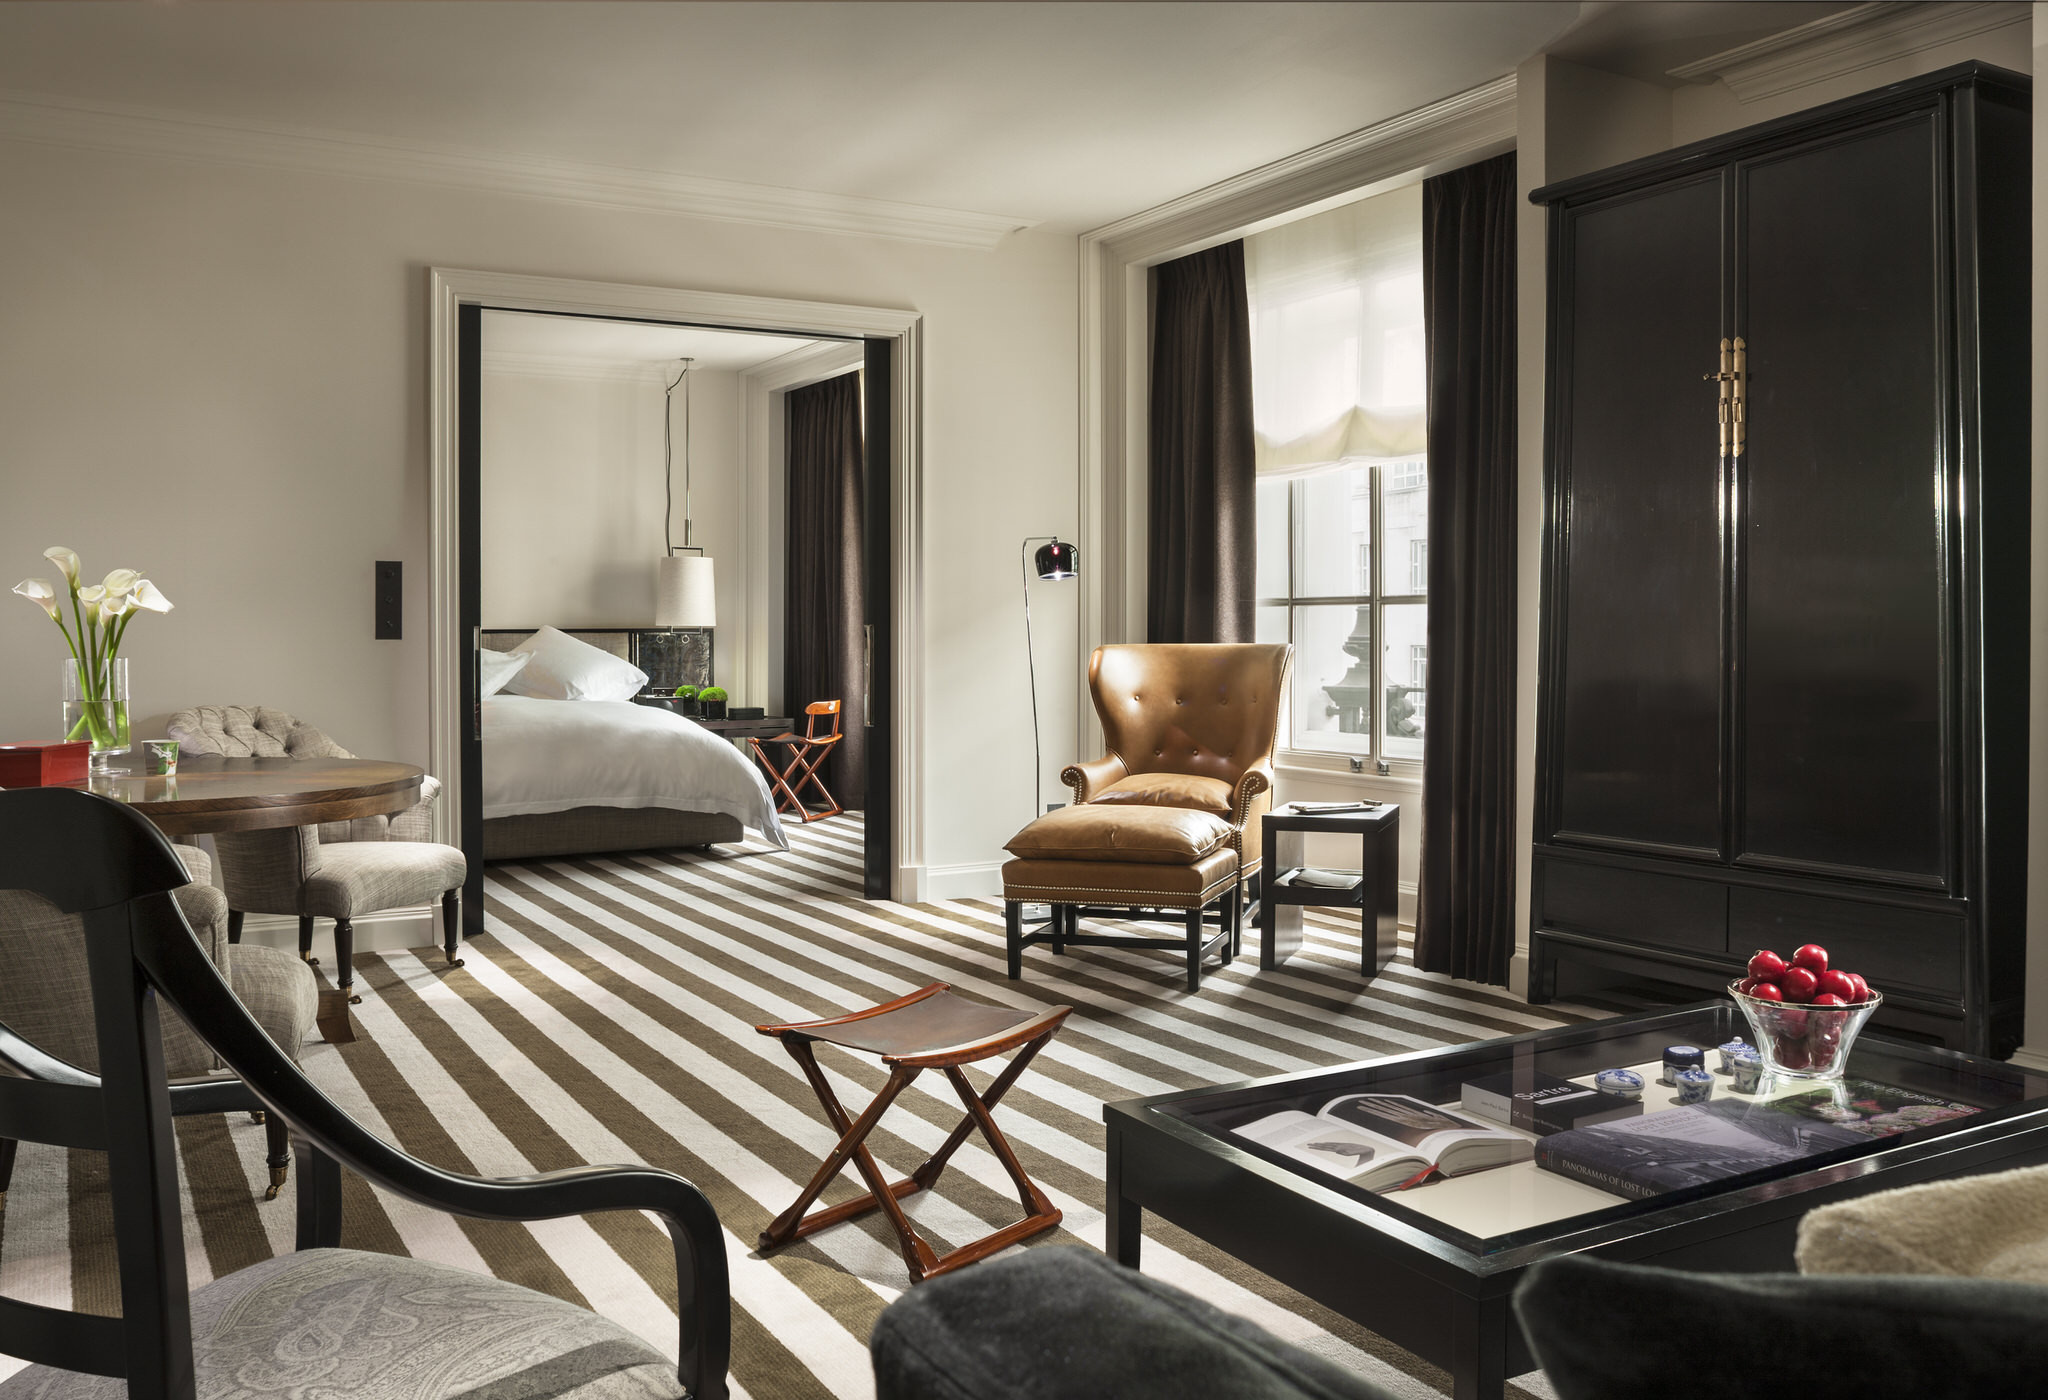 My hOtel: a review of Rosewood London | Mrs O Around The World